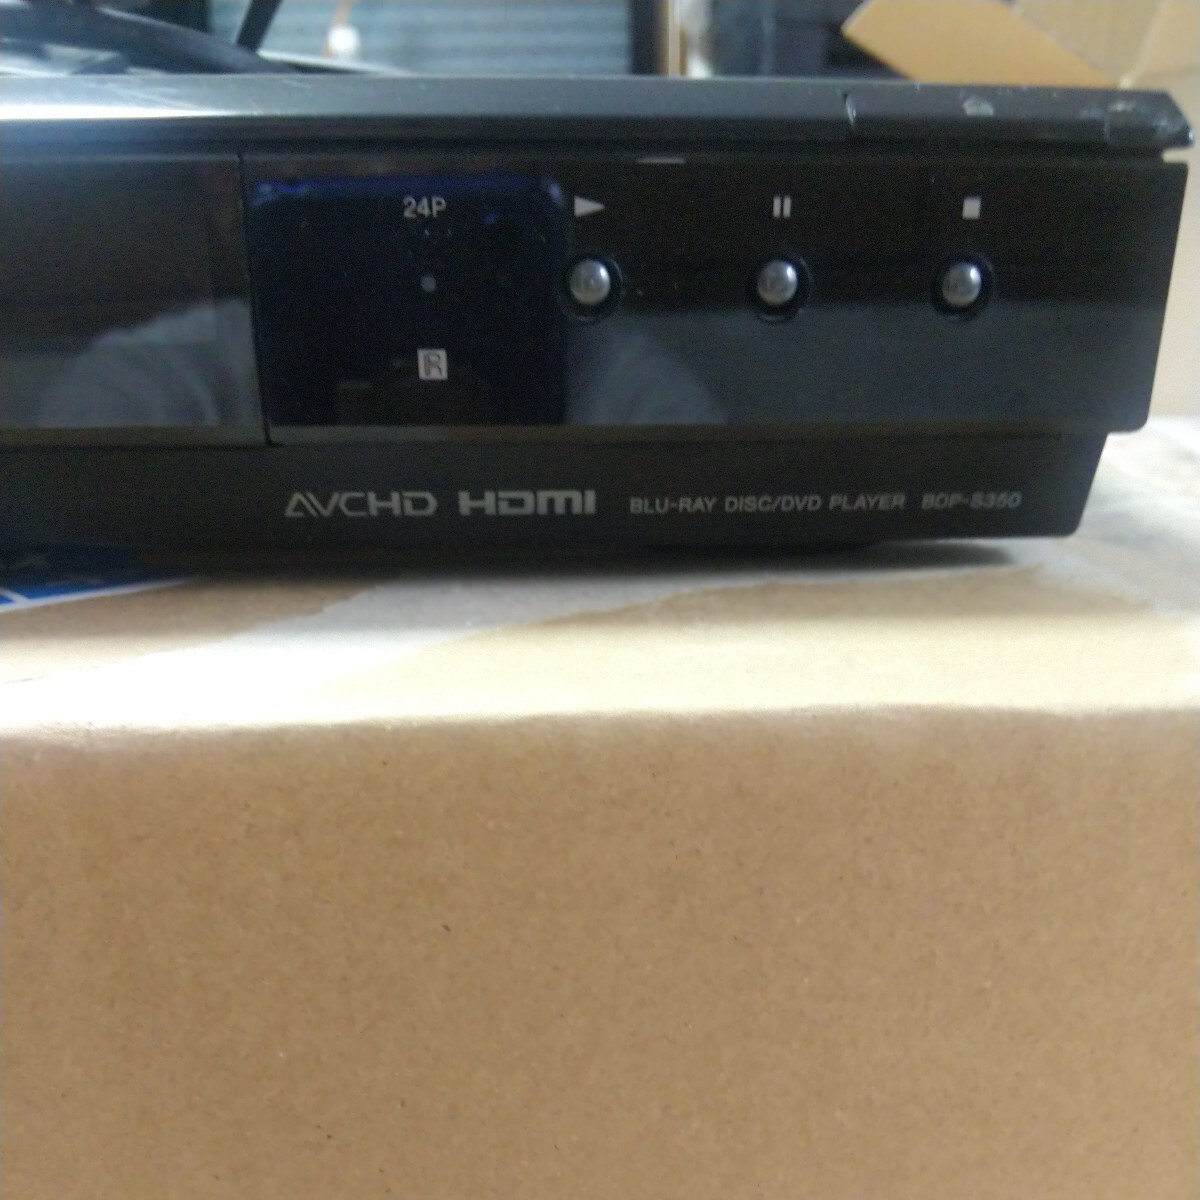  Junk SONY Blue-ray player bdp-s350 2009 year made 